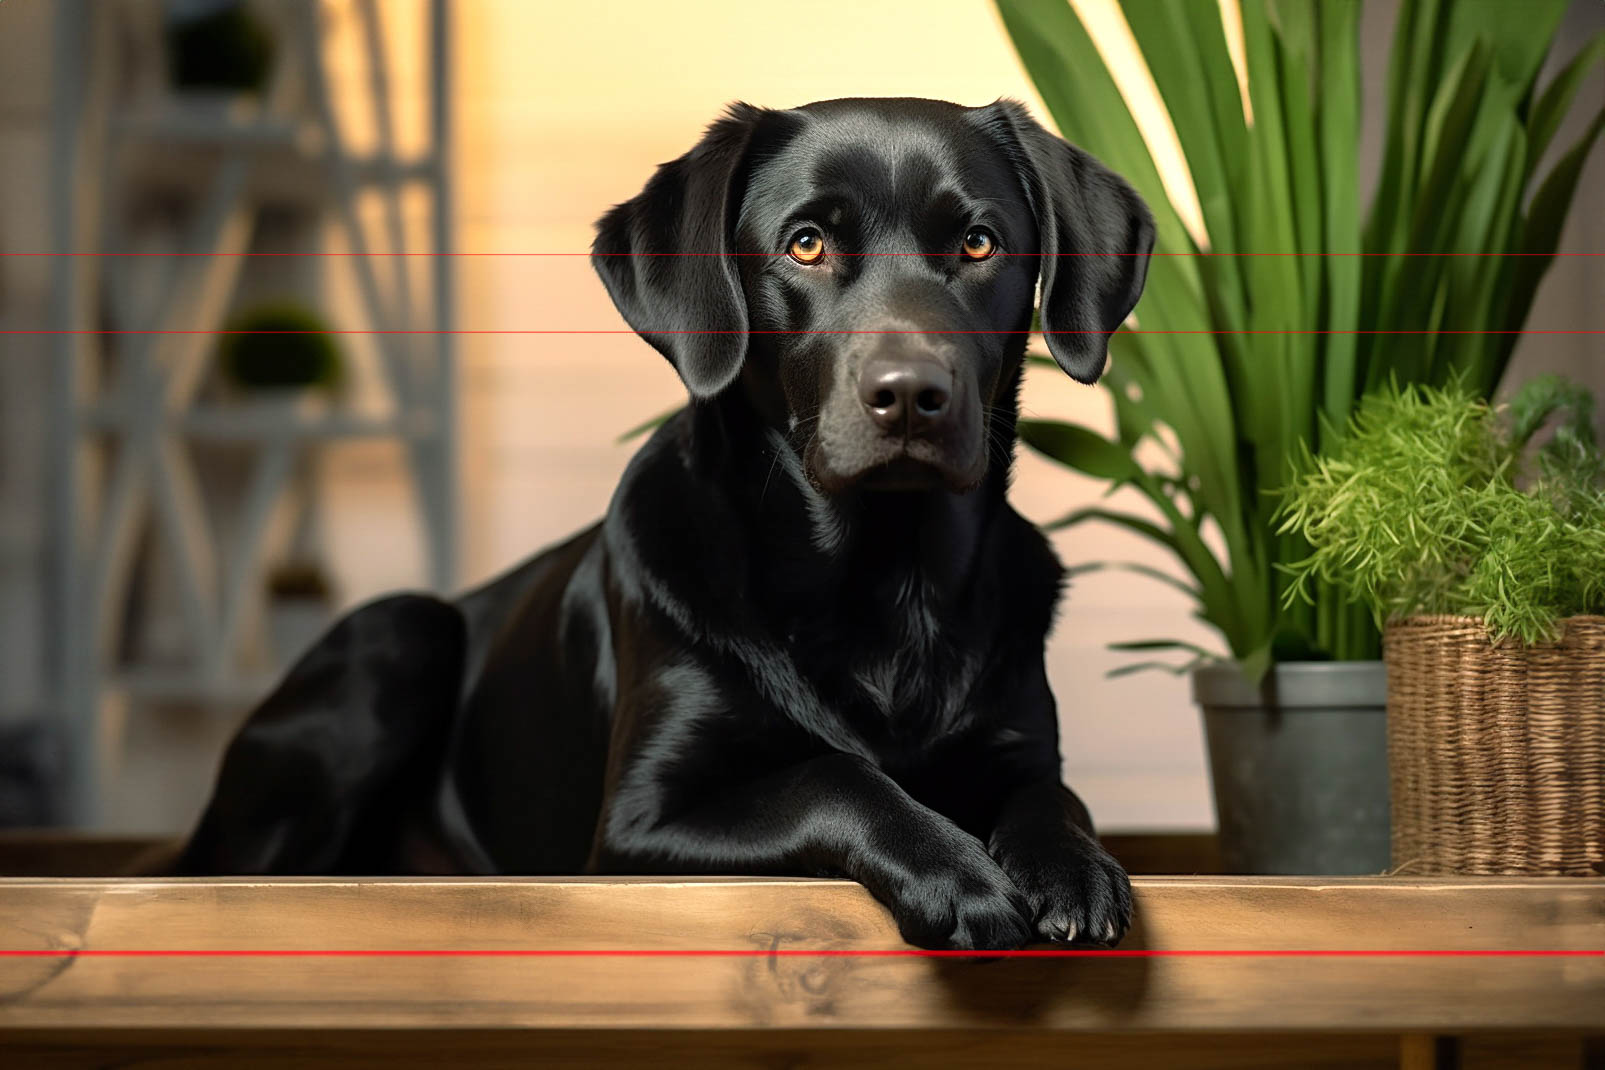 A black Labrador Retriever lies on a wooden surface indoors. The dog looks directly at the camera with alert eyes. Behind it, there are potted green plants and a blurred, warmly lit background creating a serene picture.